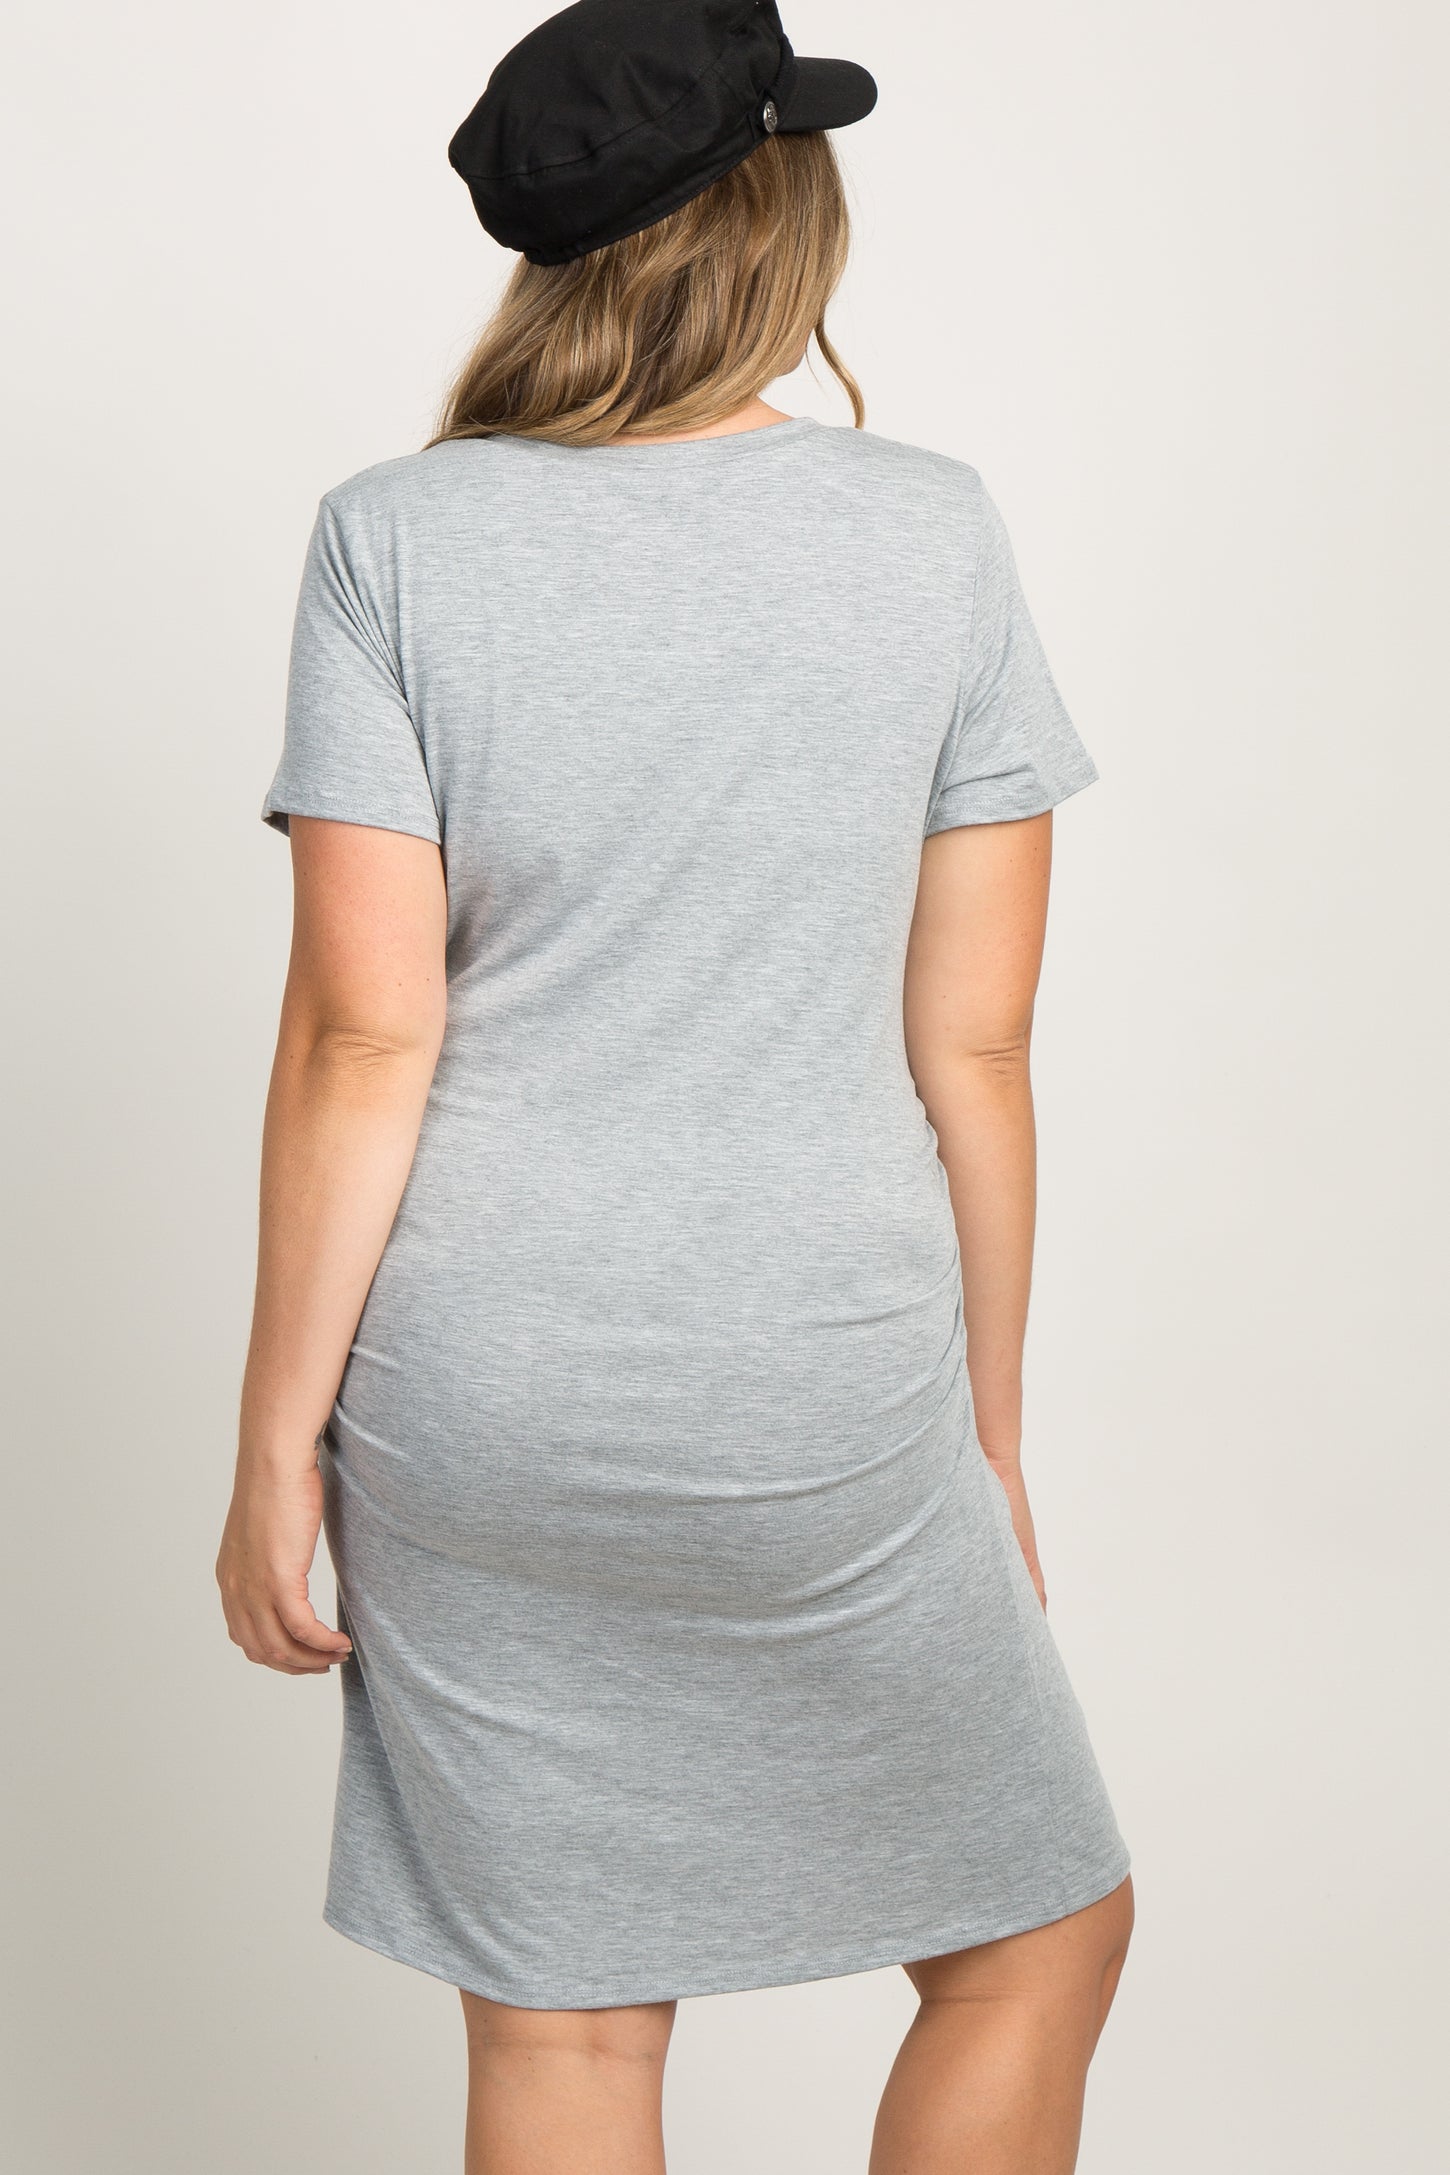 Heather Grey Basic Ruched Fitted Plus Maternity Dress